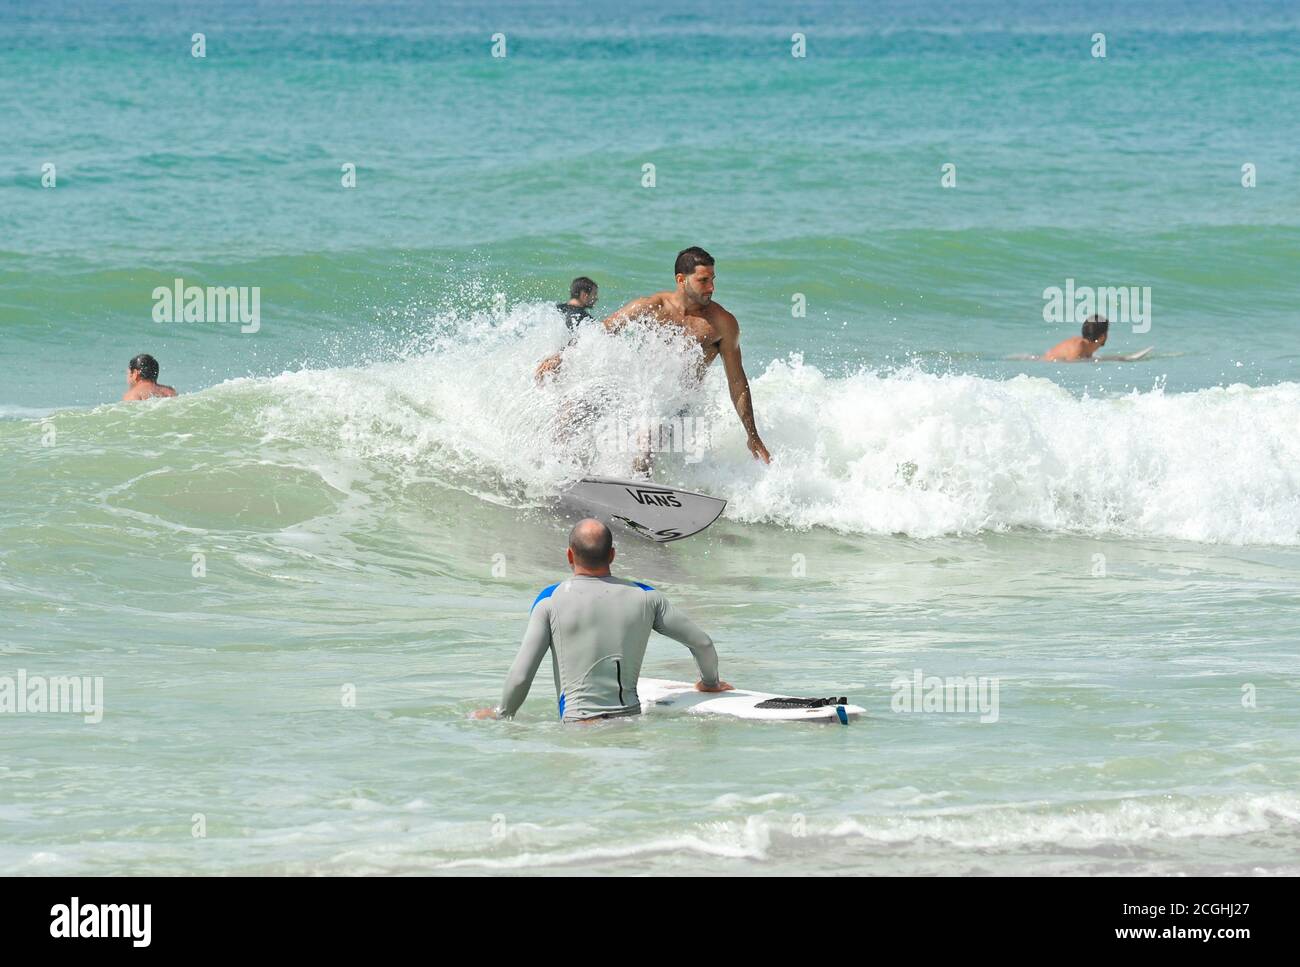 HOLMES BEACH, ANNA MARIA ISLAND, FL / USA -  October 4, 2013: Surfers on Anna Maria Island taking advantage of the larger than normal waves in the Gul Stock Photo